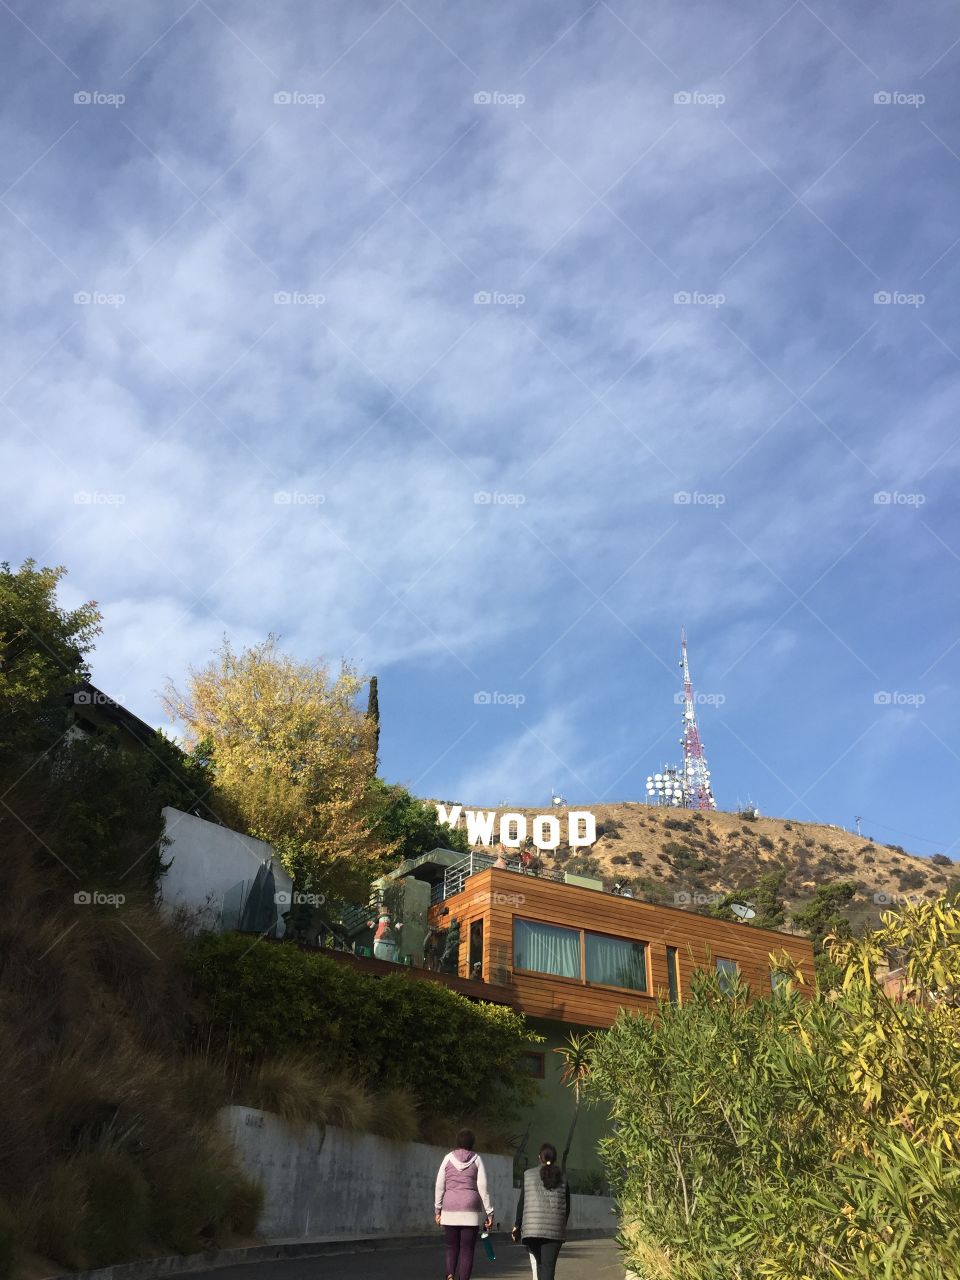 Looking at the hollywood sign from a neighborhood 